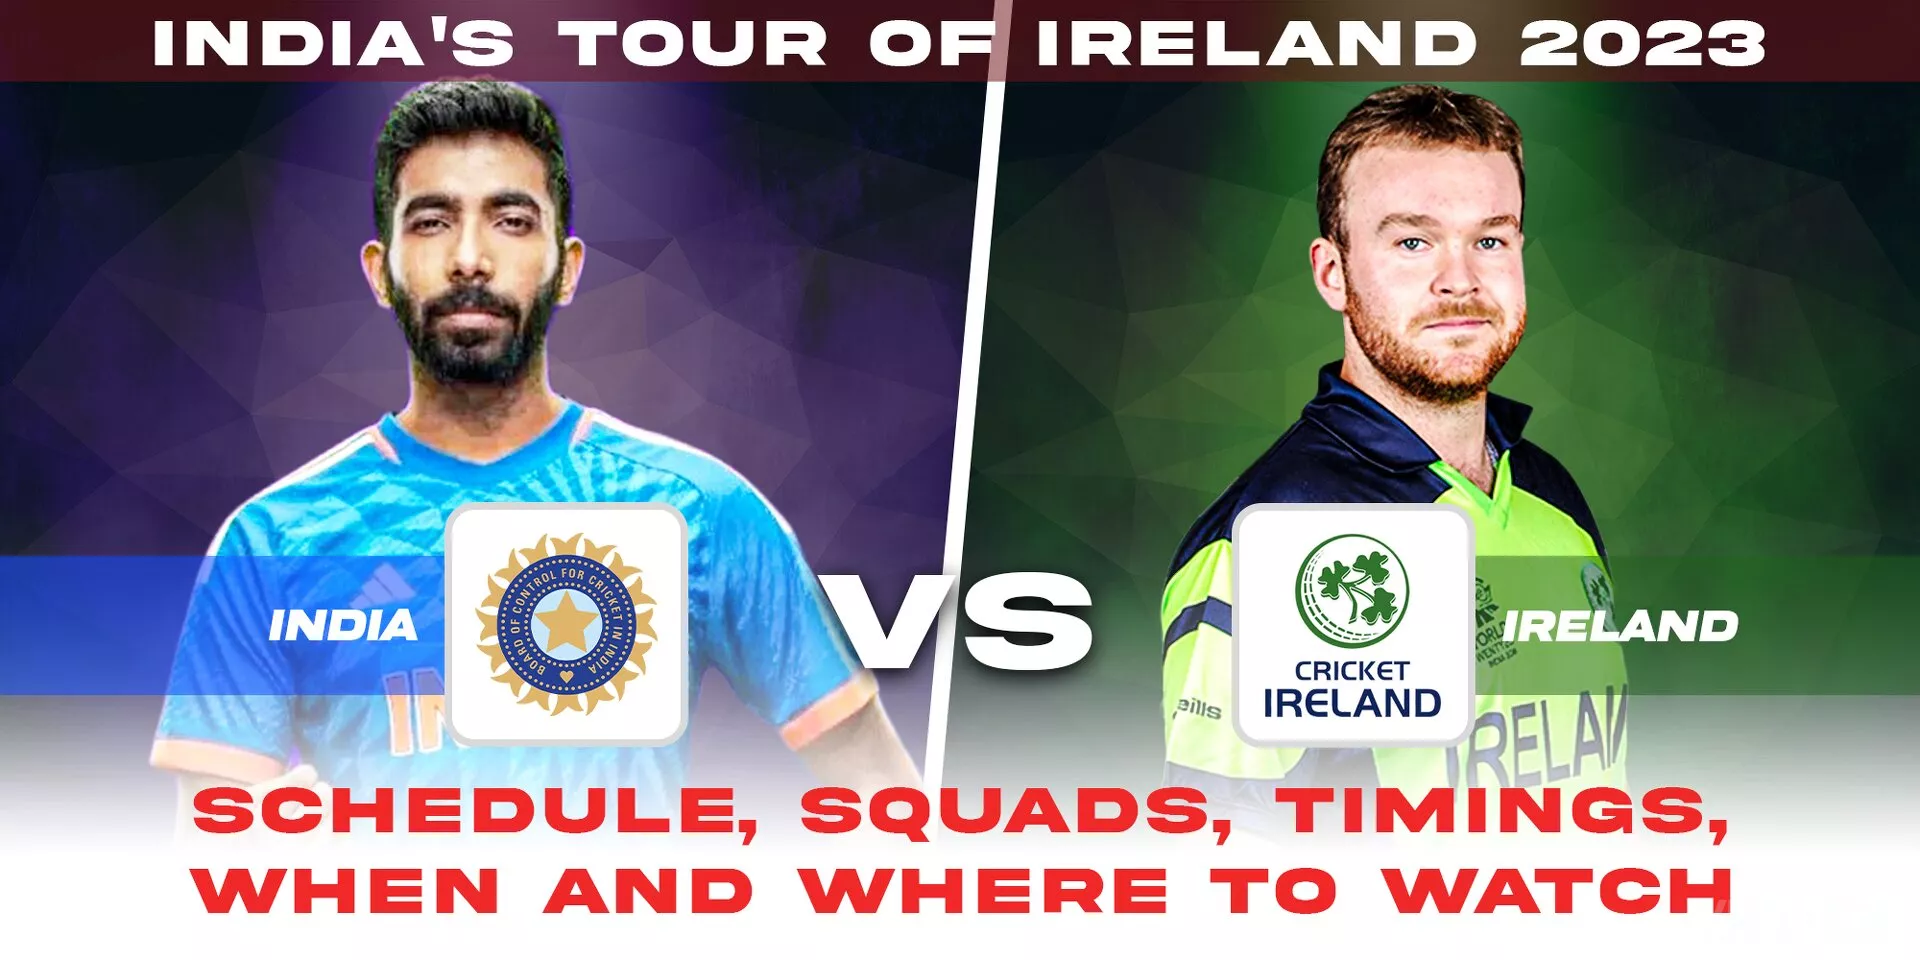 India’s tour of Ireland 2023 Schedule, Squads, Venues, When and Where